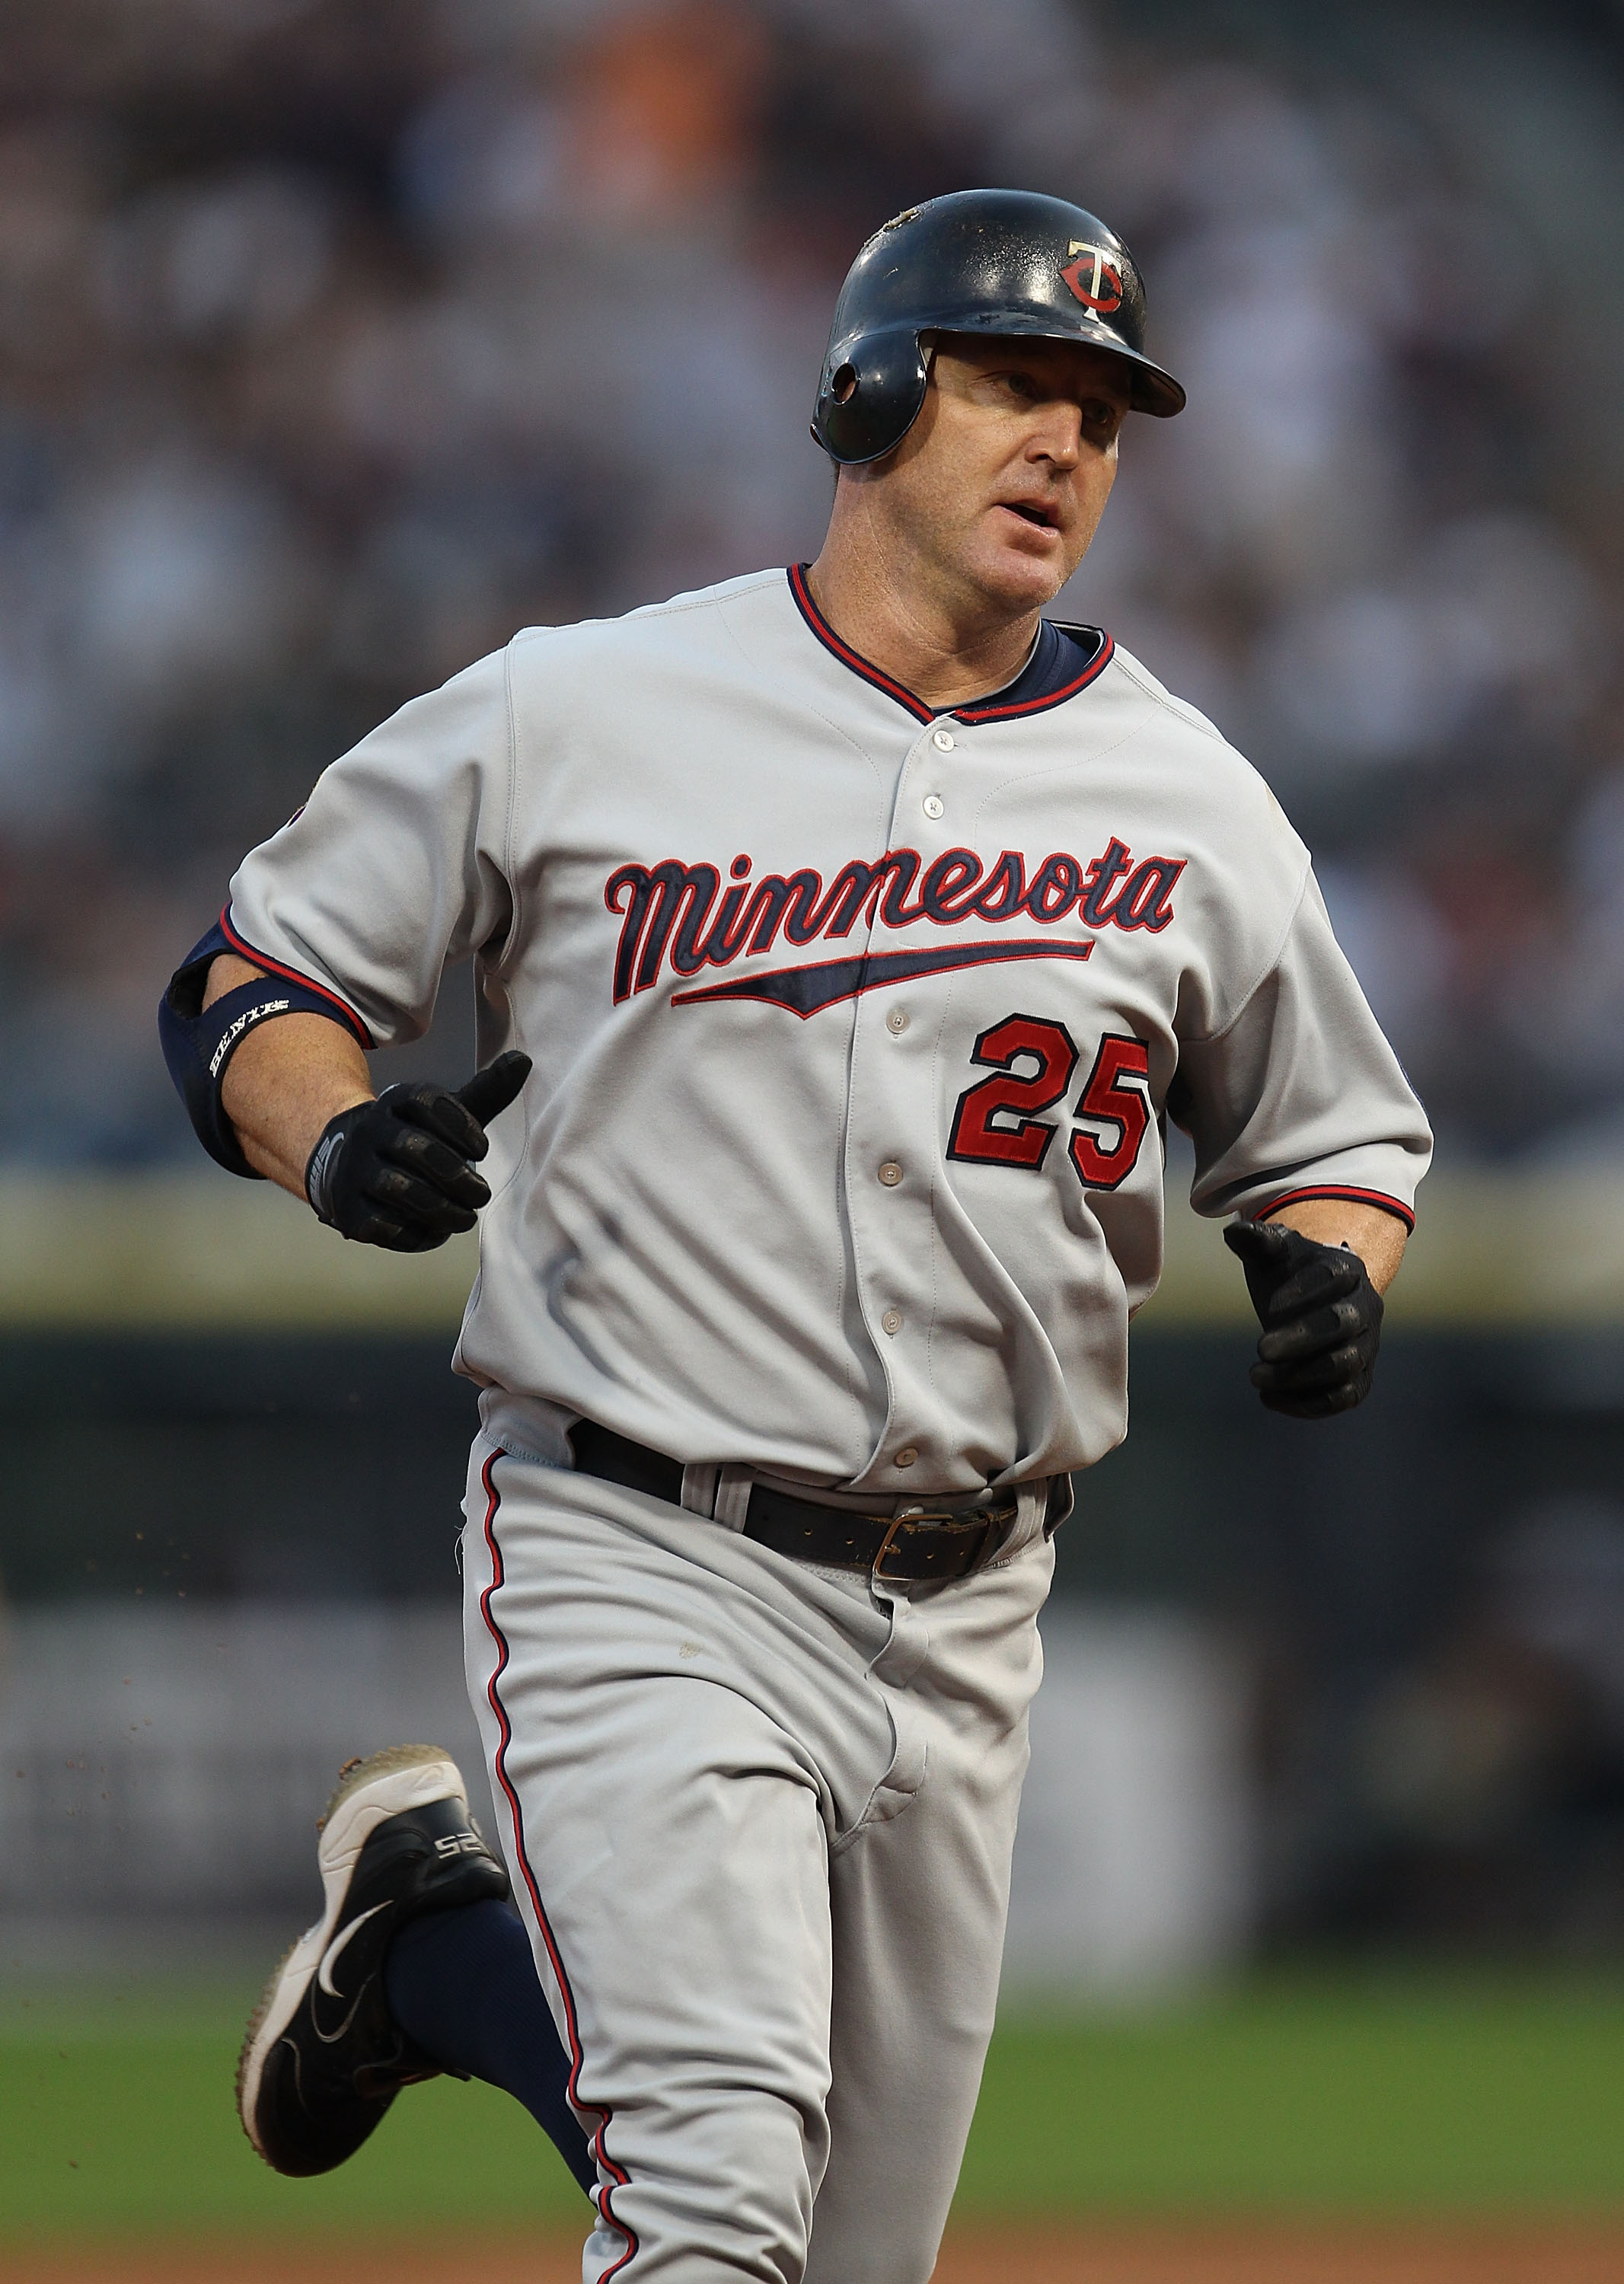 CHICAGO - AUGUST 10: Jim Thome #25 of the Minnesota Twins runs the bases after his 1st inning home run against the Chicago White Sox at U.S. Cellular Field on August 10, 2010 in Chicago, Illinois. The Twins defeated the White Sox 12-6. (Photo by Jonathan